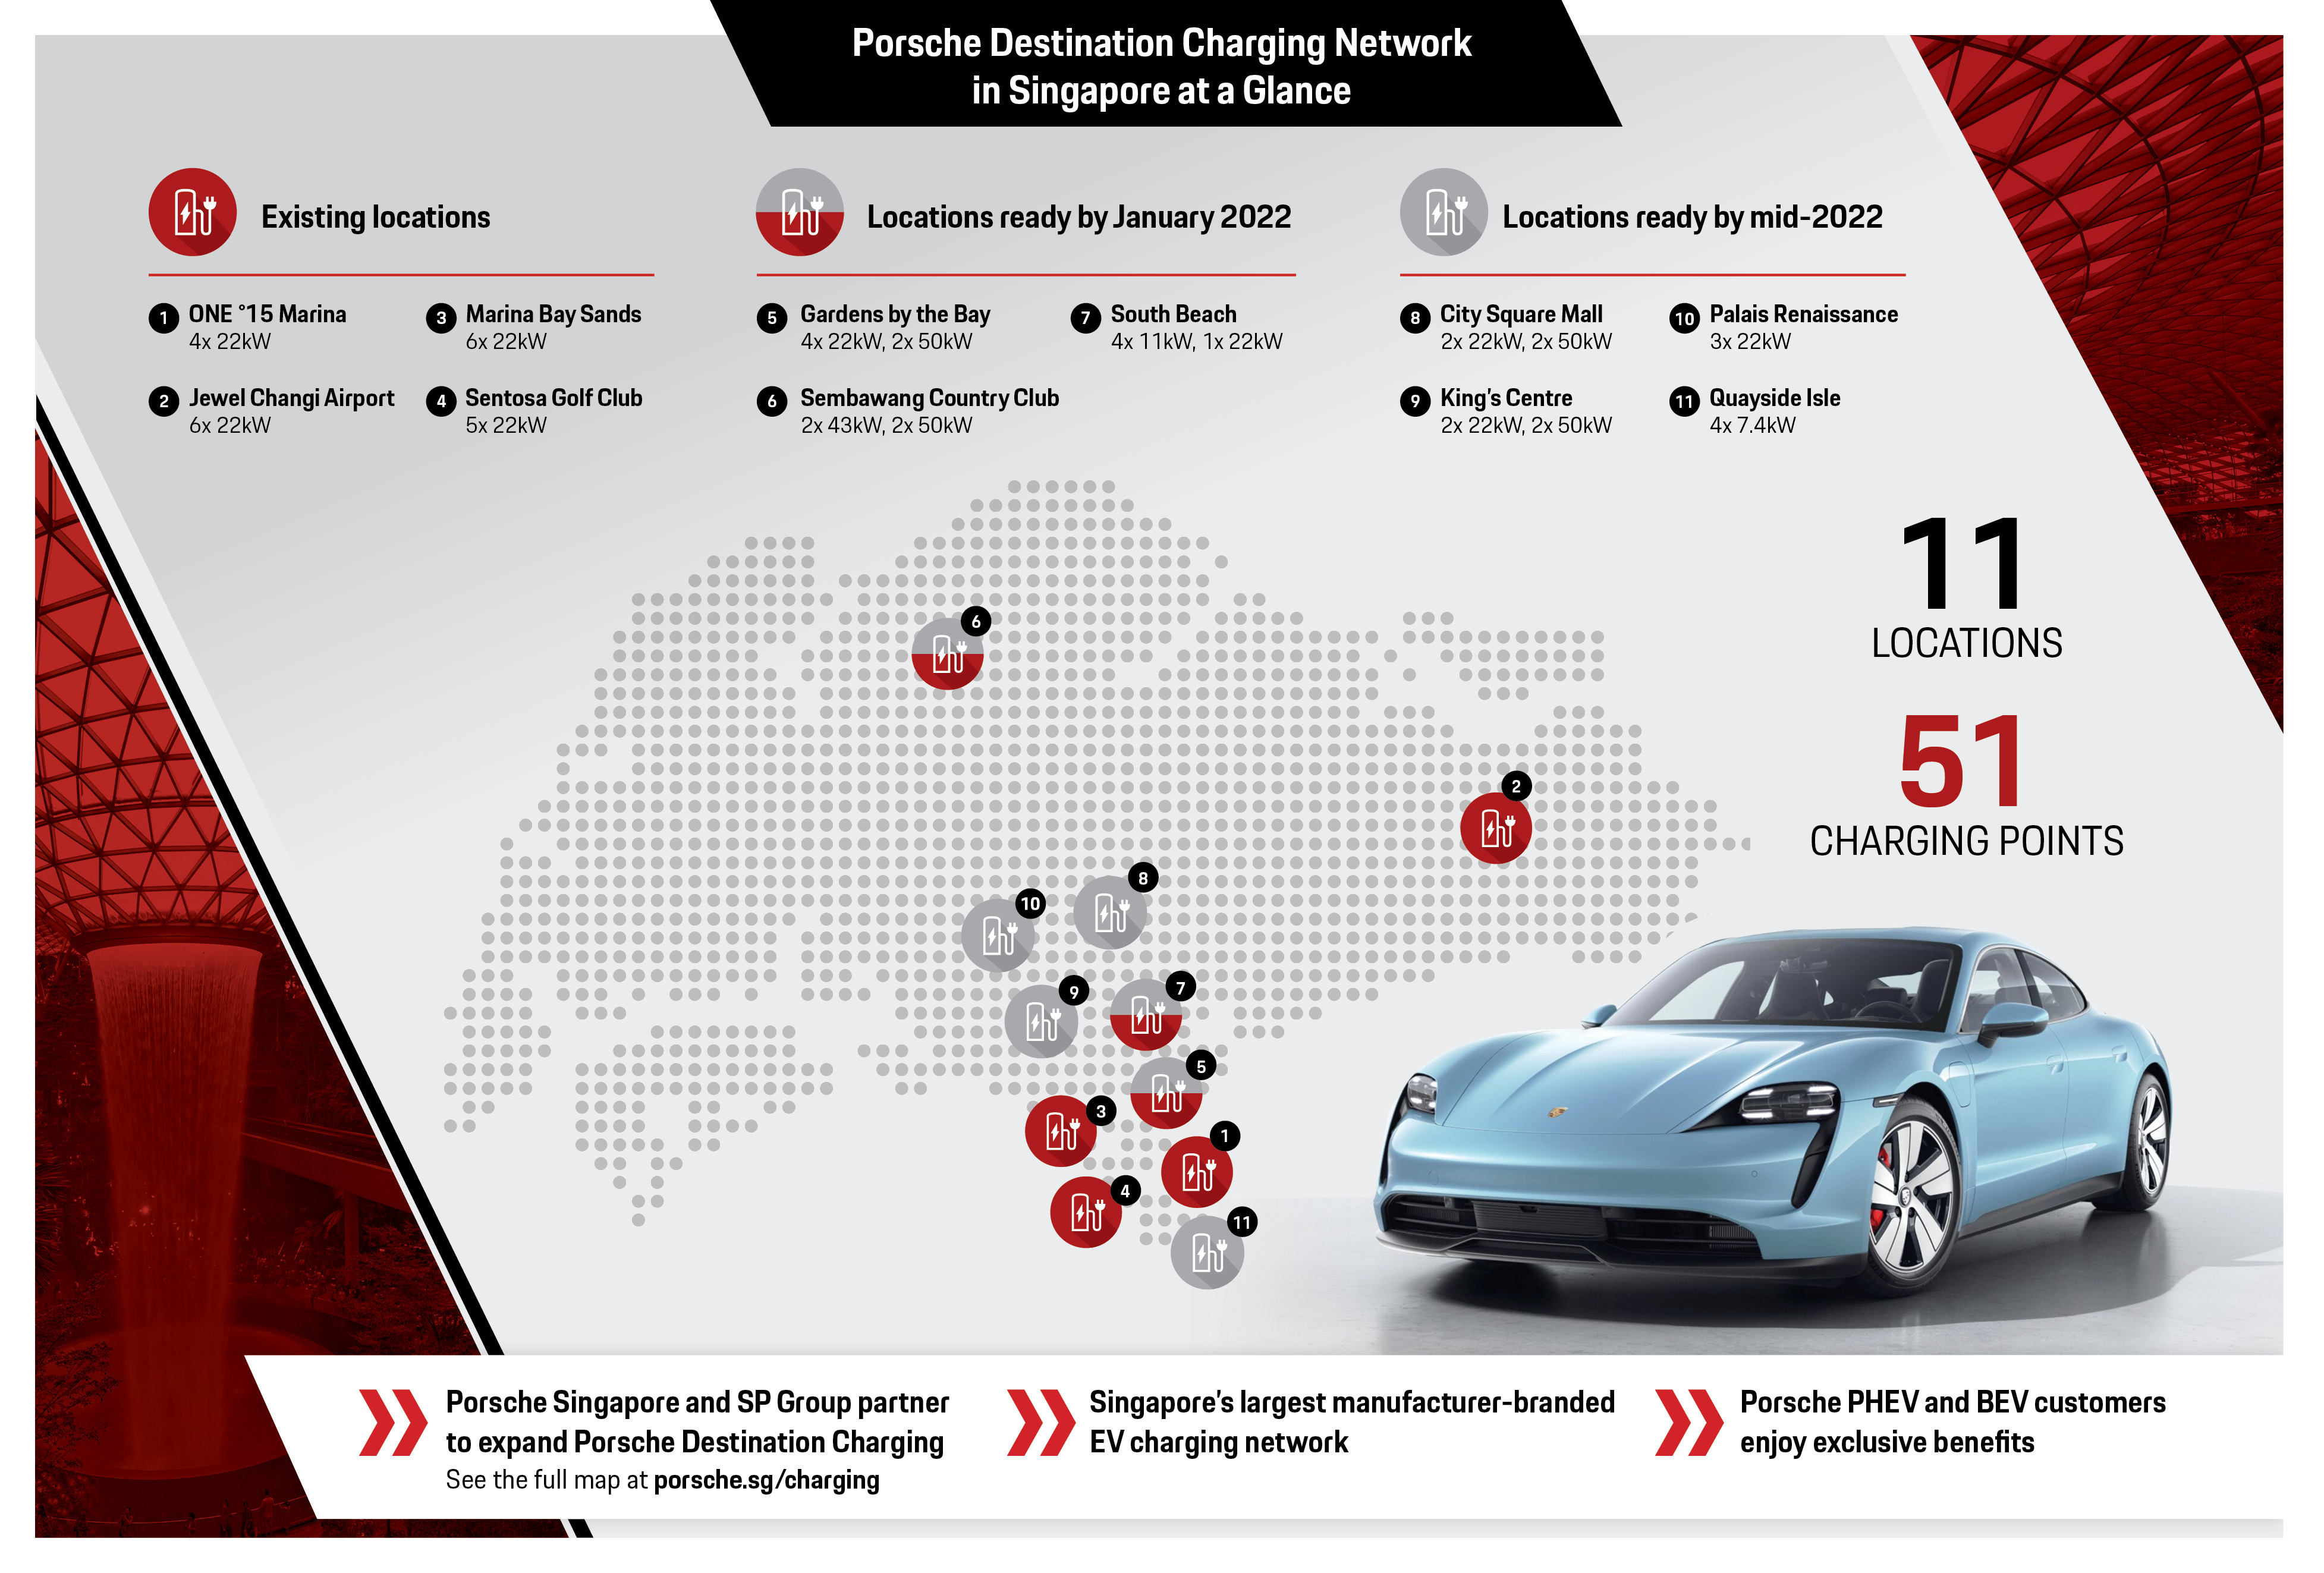 Porsche launches largest manufacturer-branded charging network in Singapore - Image 7